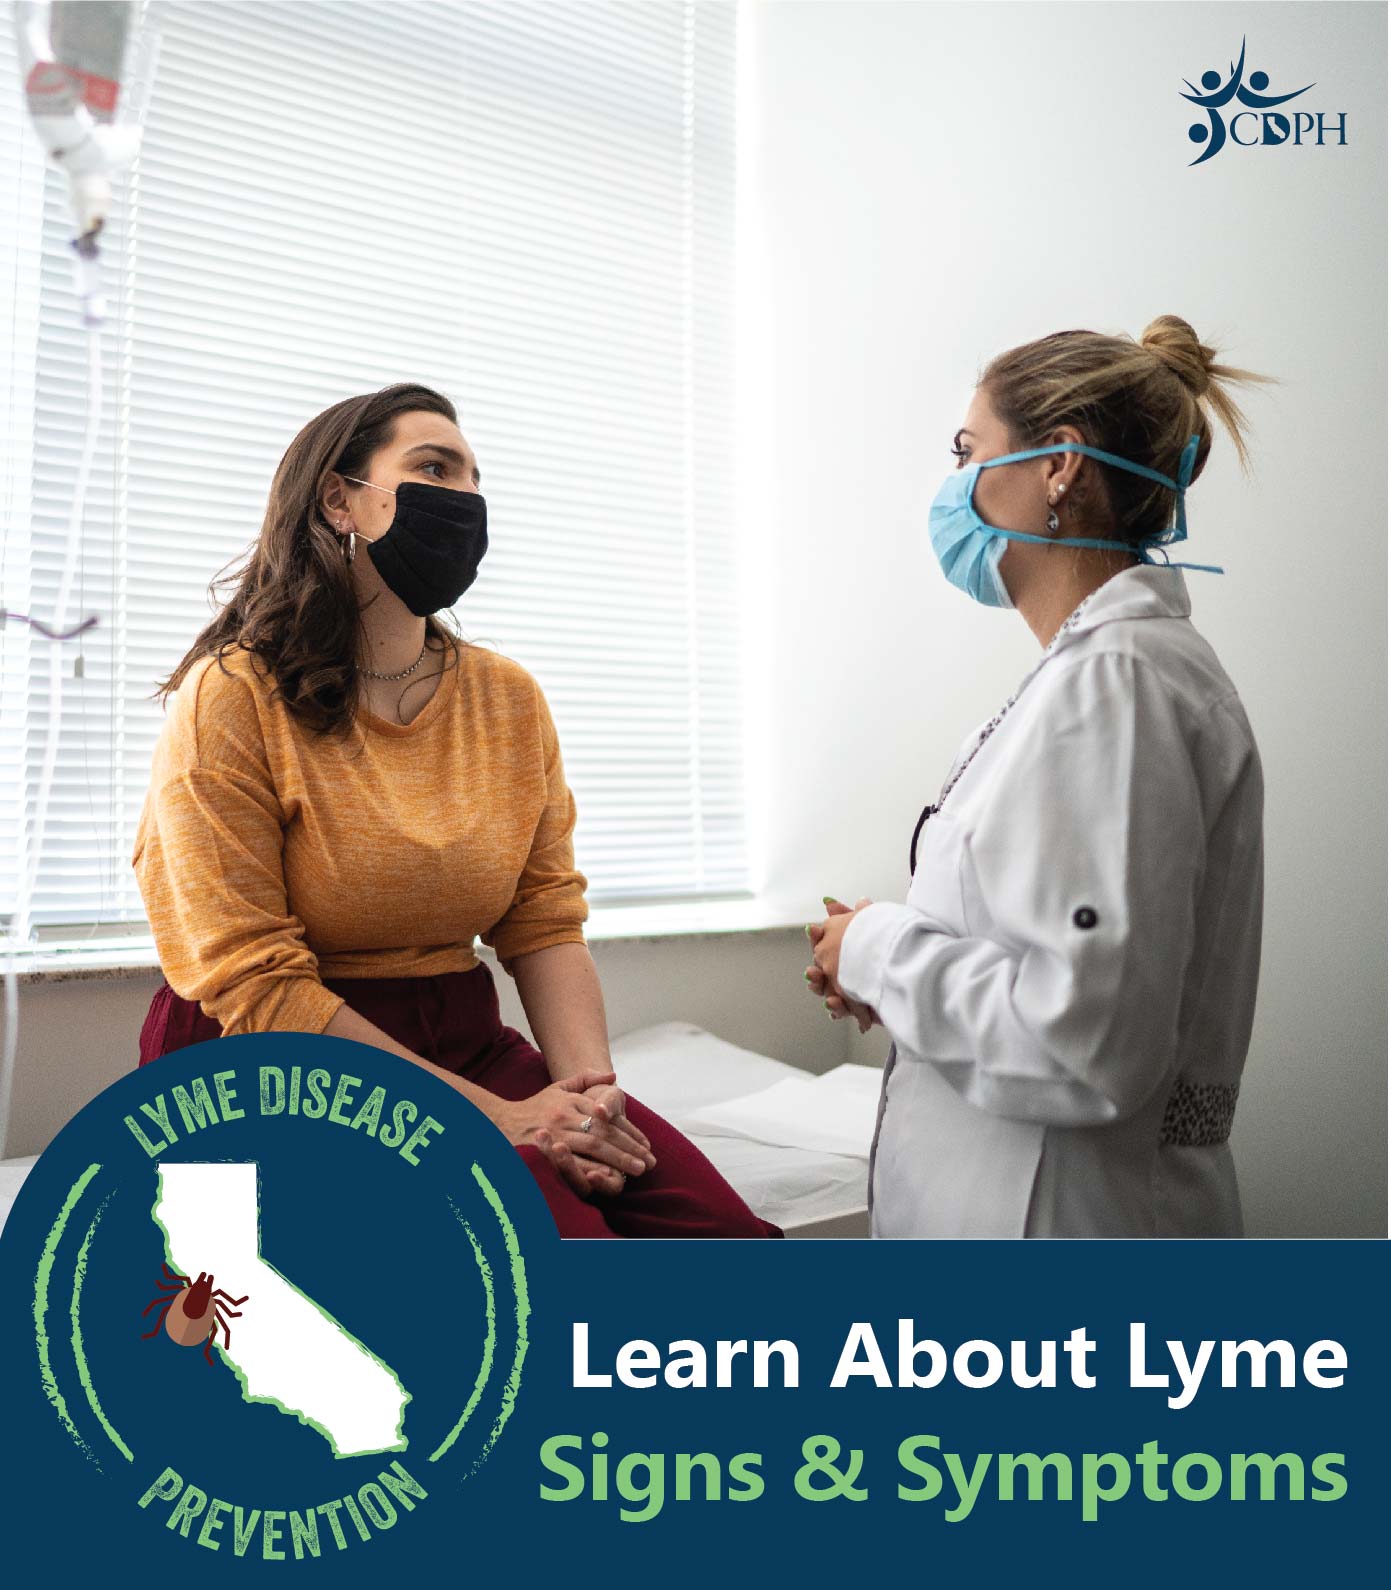 Leartn about Lyme signs & symptoms